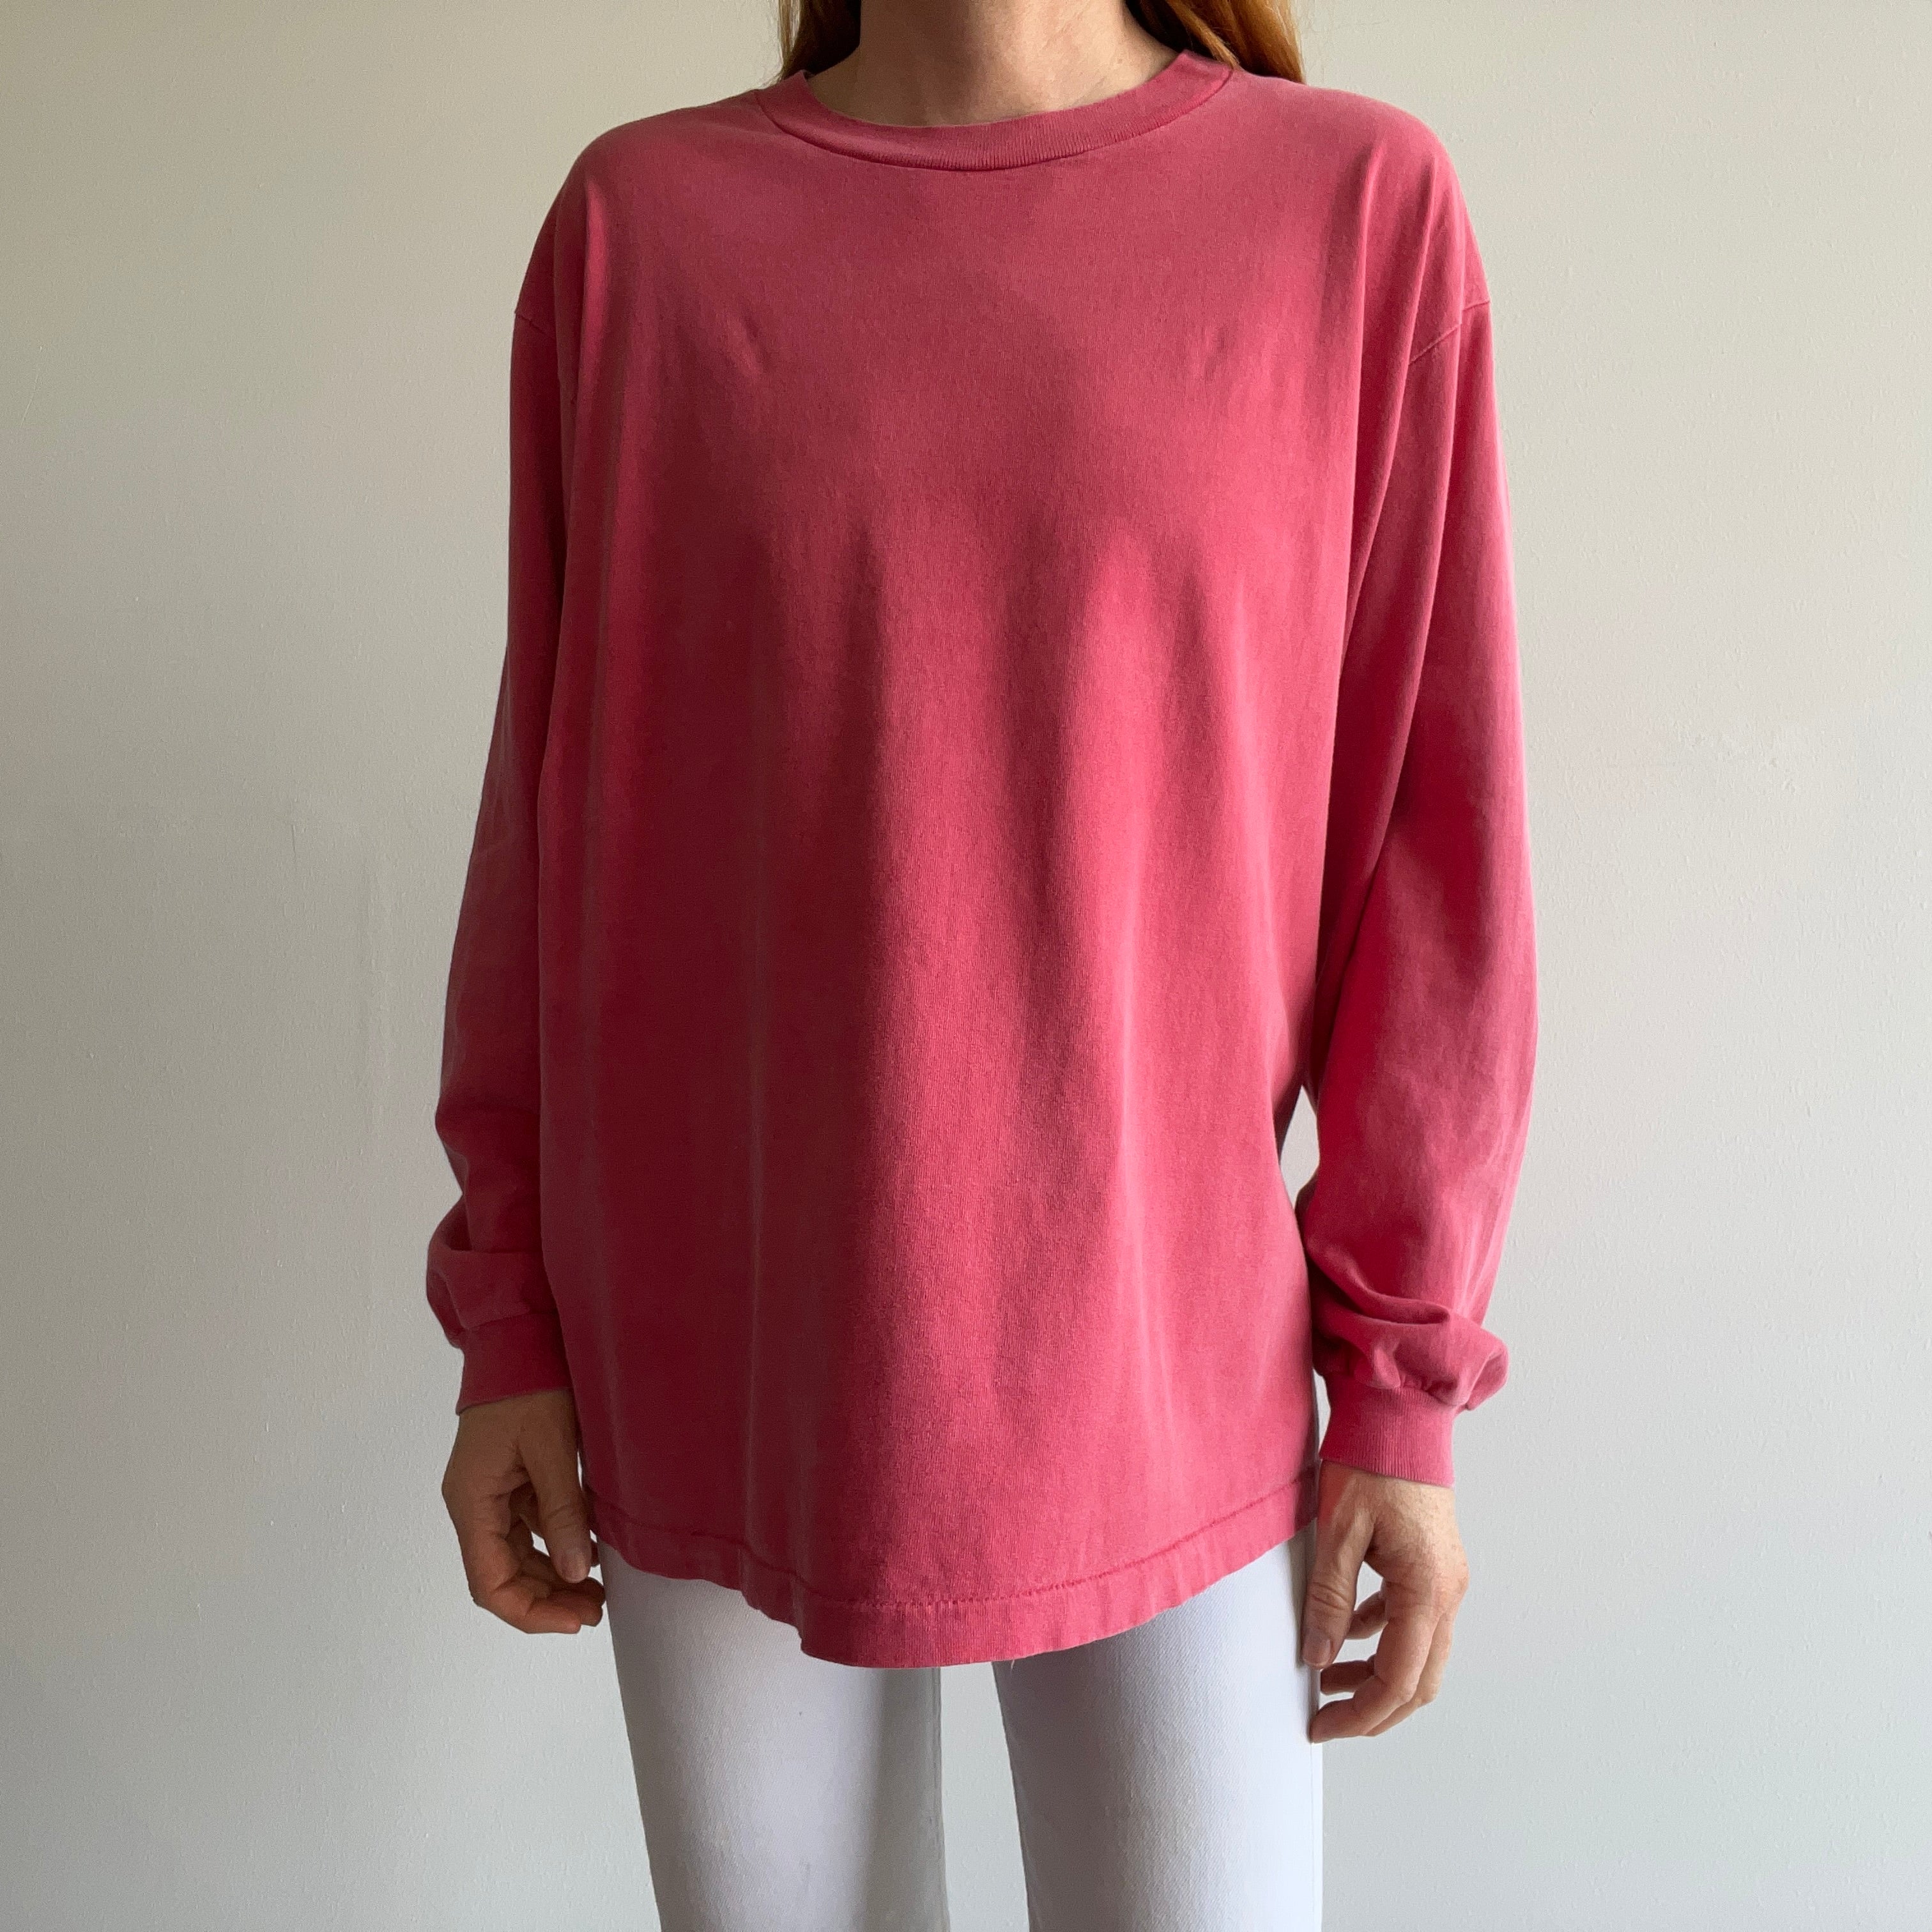 1990s Super Soft and Slouchy Faded Red to Salmon-ish Long Sleeve Cotton Shirt